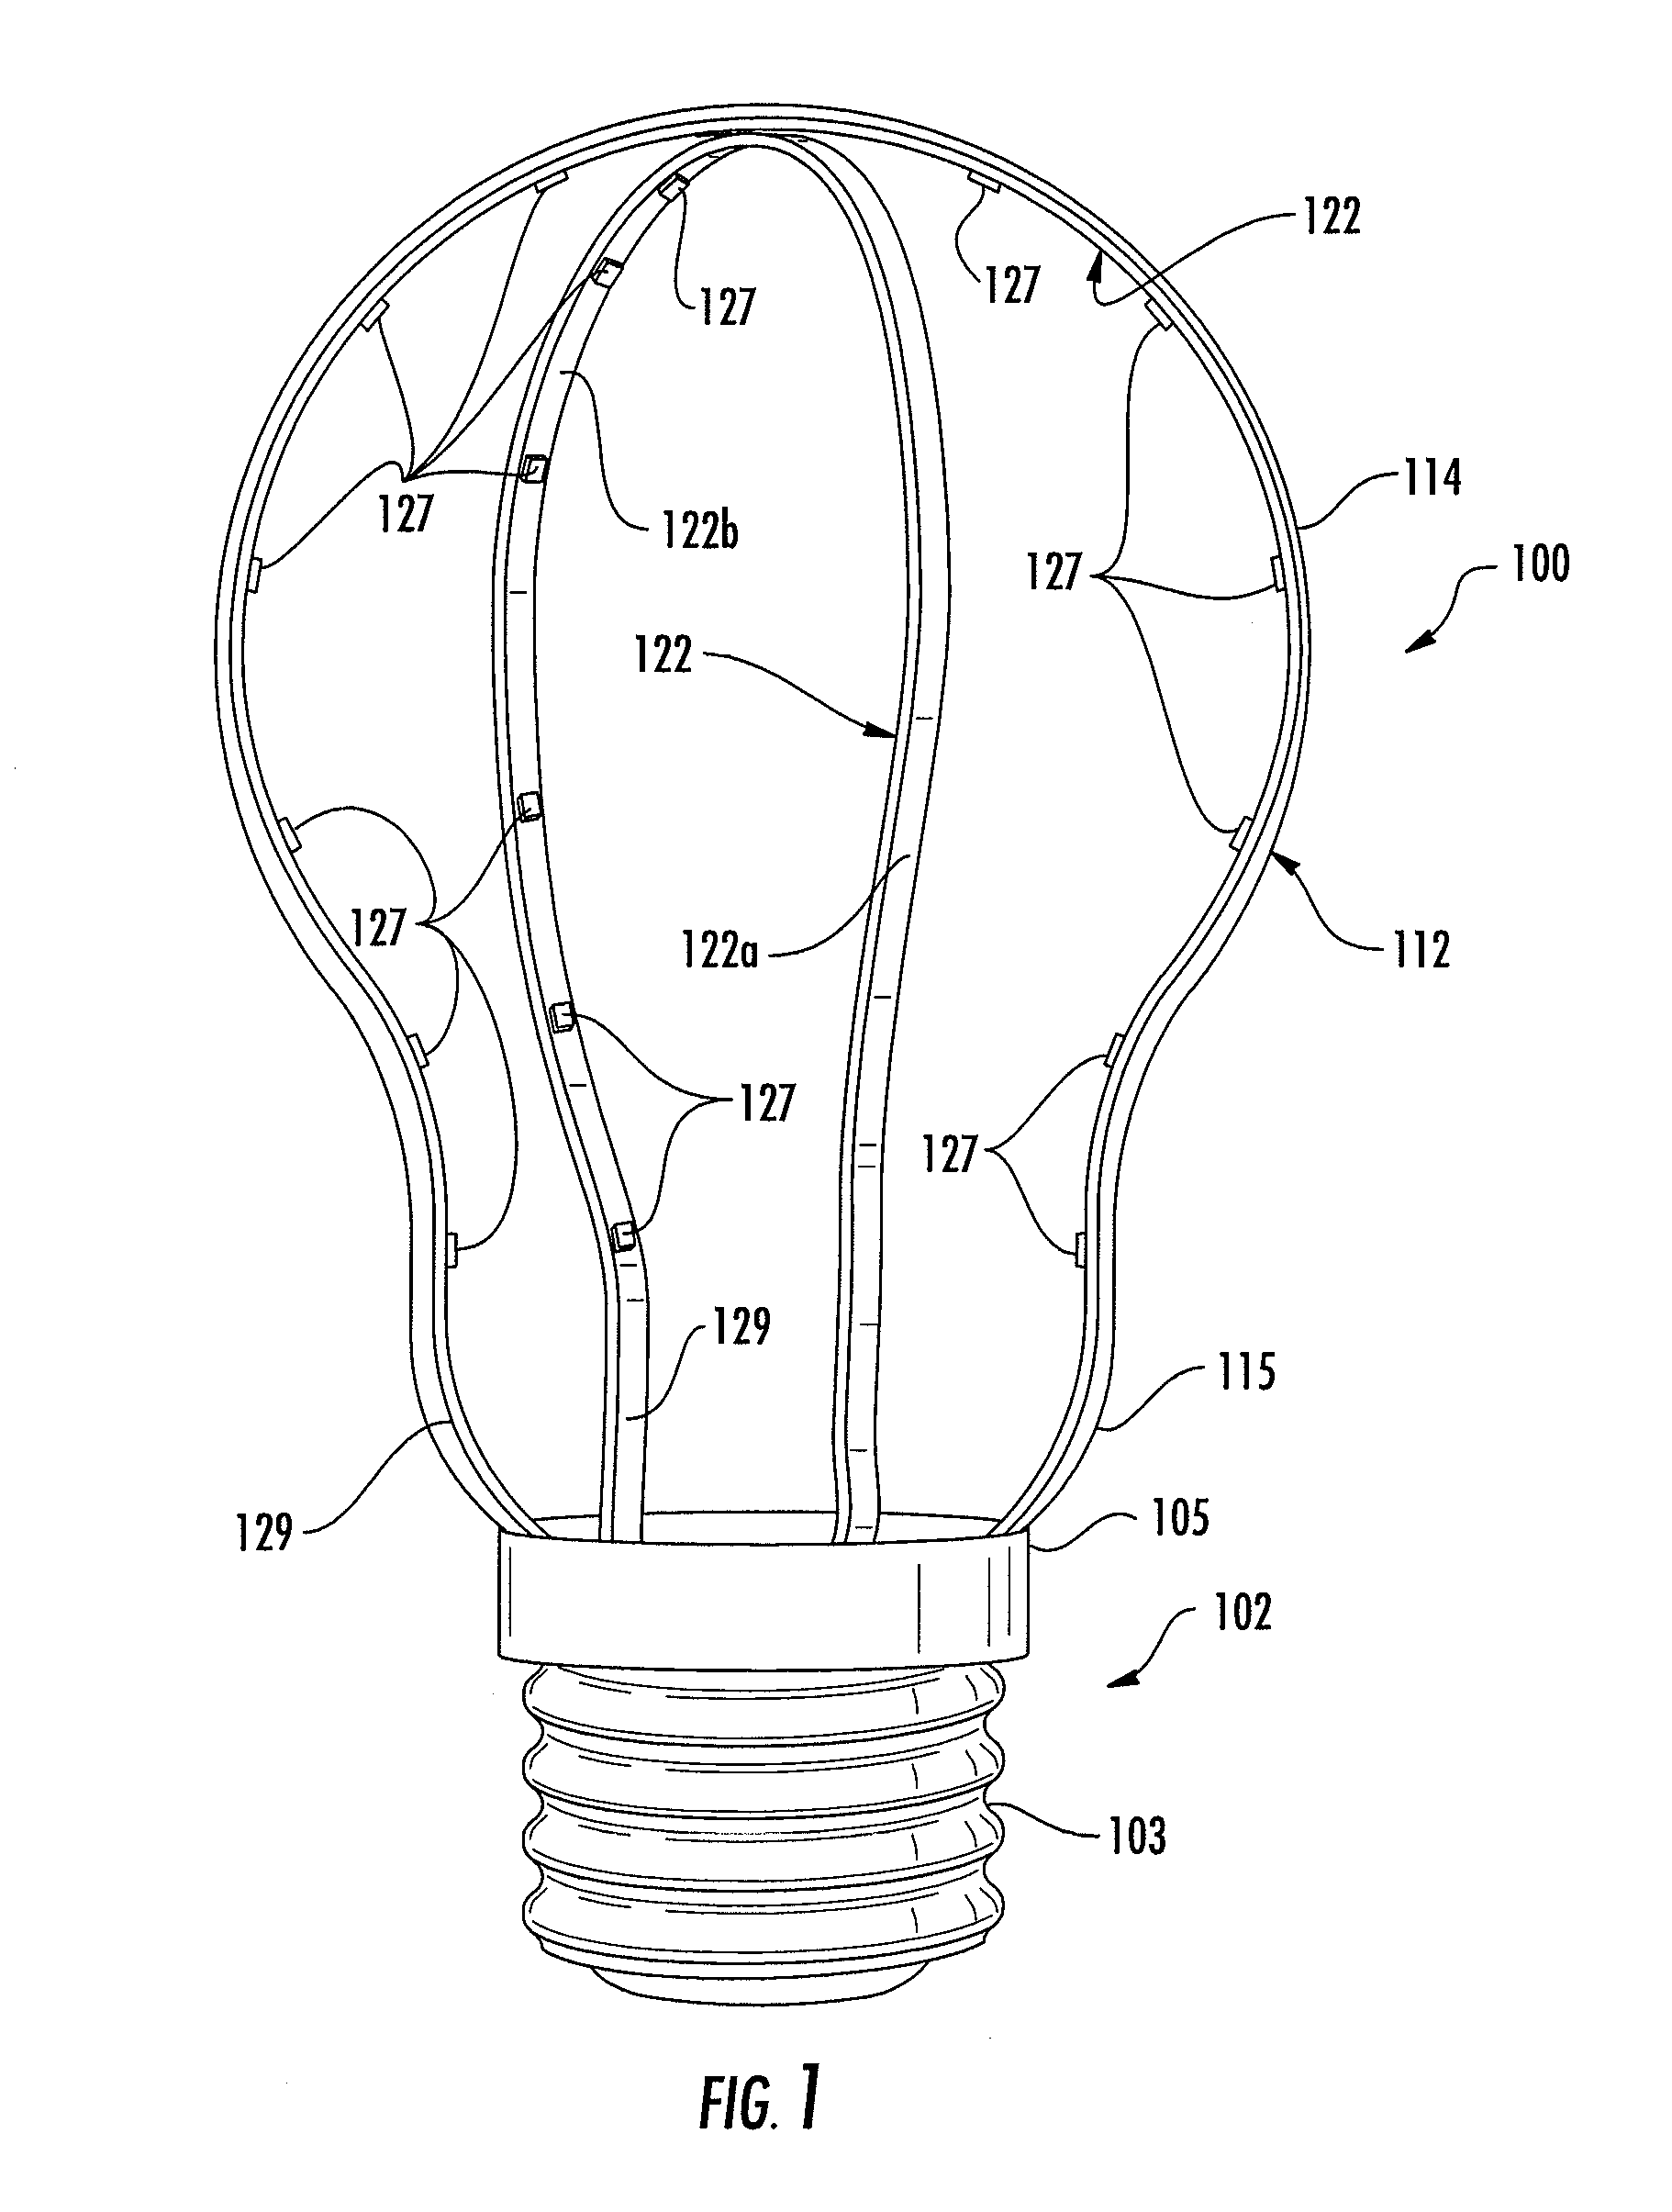 LED luminaire with improved thermal management and novel LED interconnecting architecture